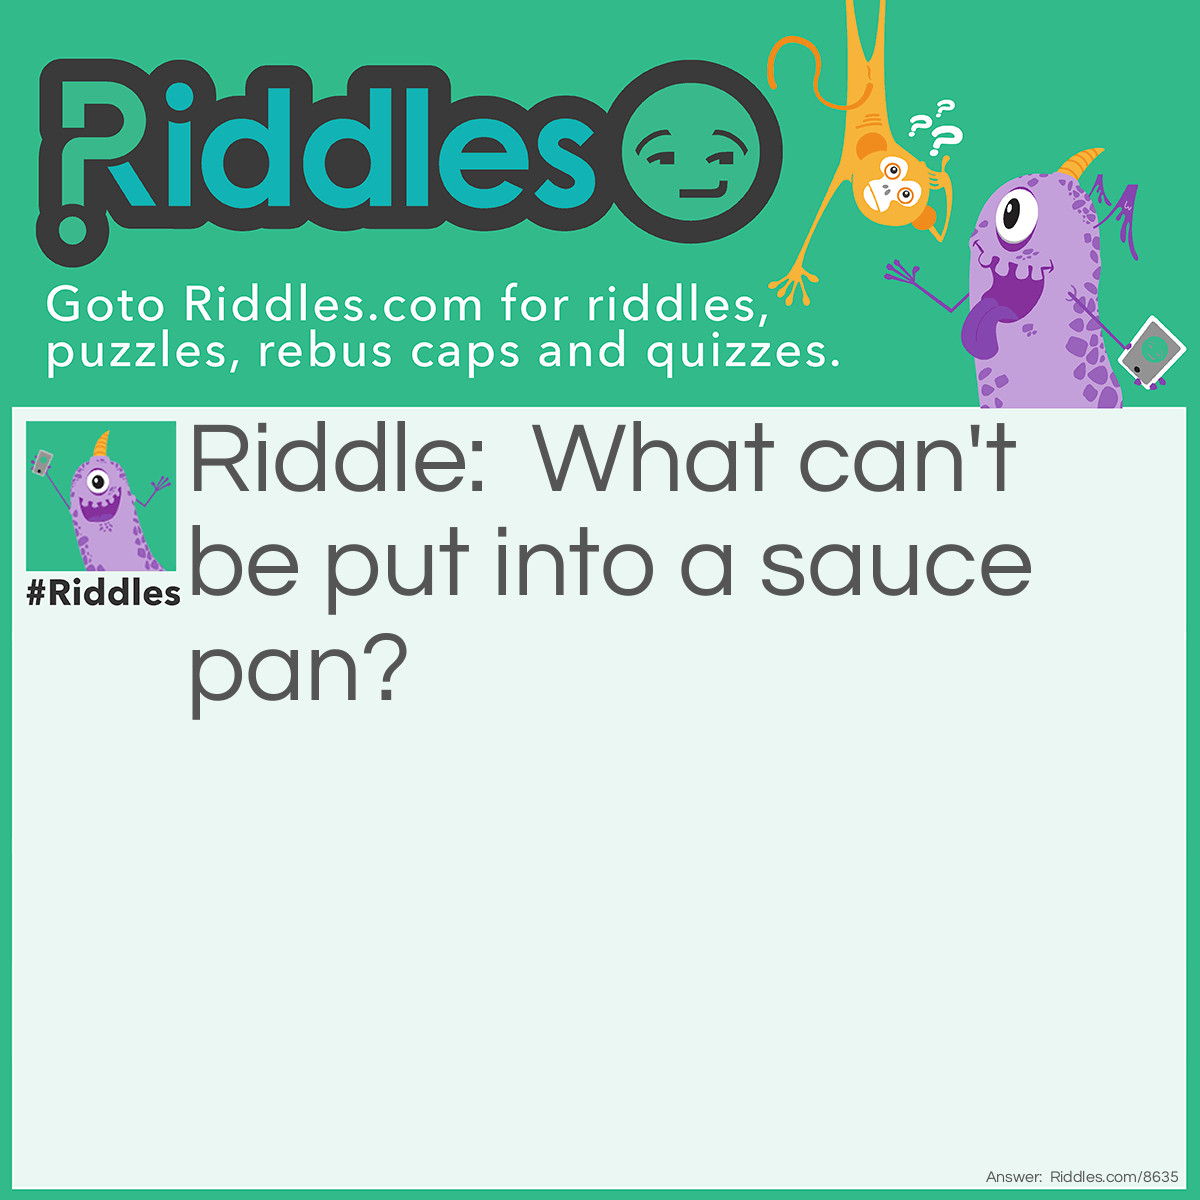 Riddle: What can't be put into a sauce pan? Answer: It’s lid.